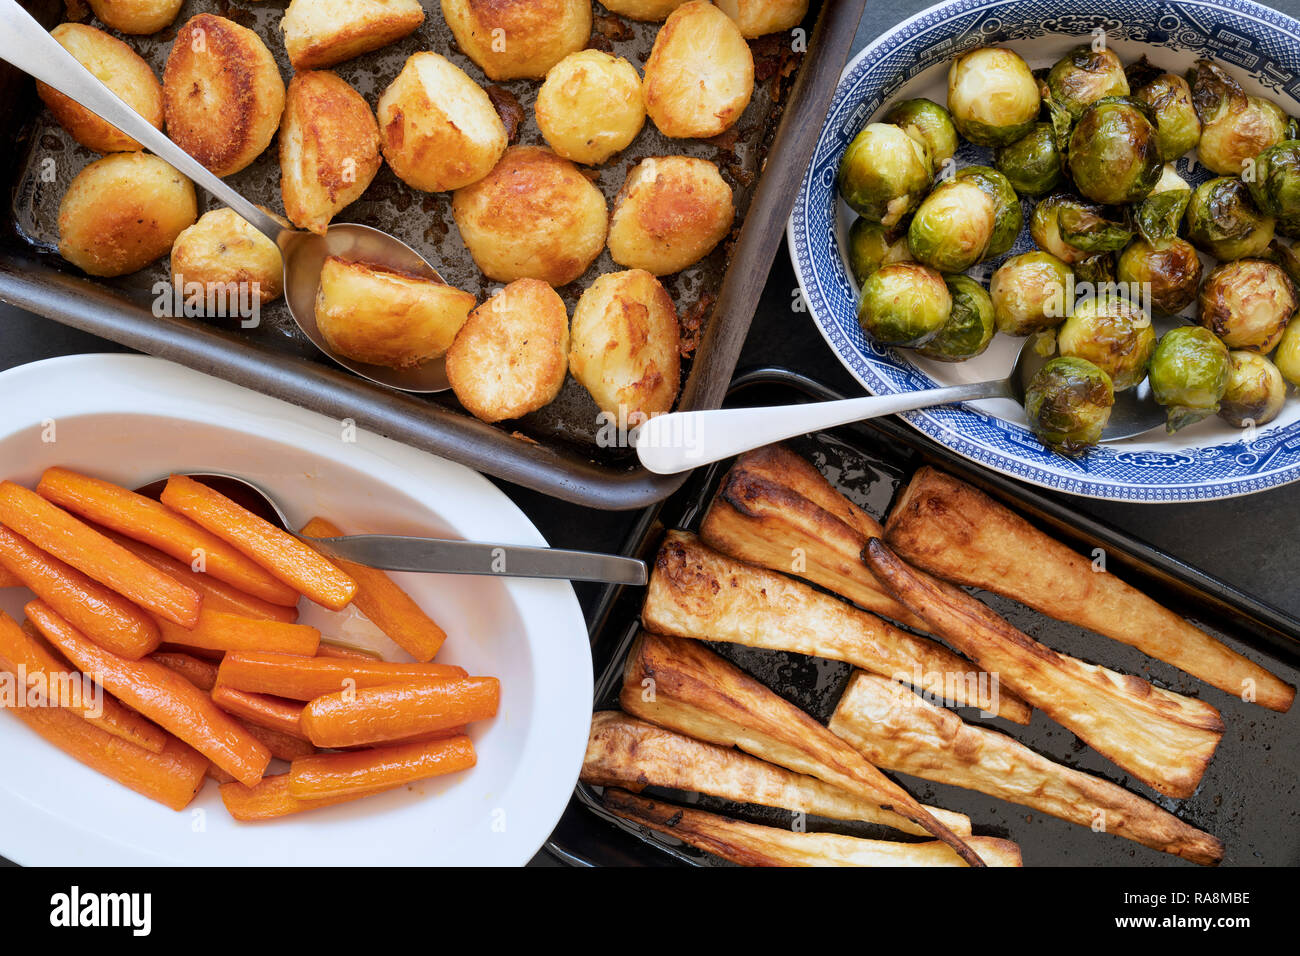 Roast potatoes, brussel sprouts, carrots and parsnips in baking trays and bowls with spoons on a slate background Stock Photo